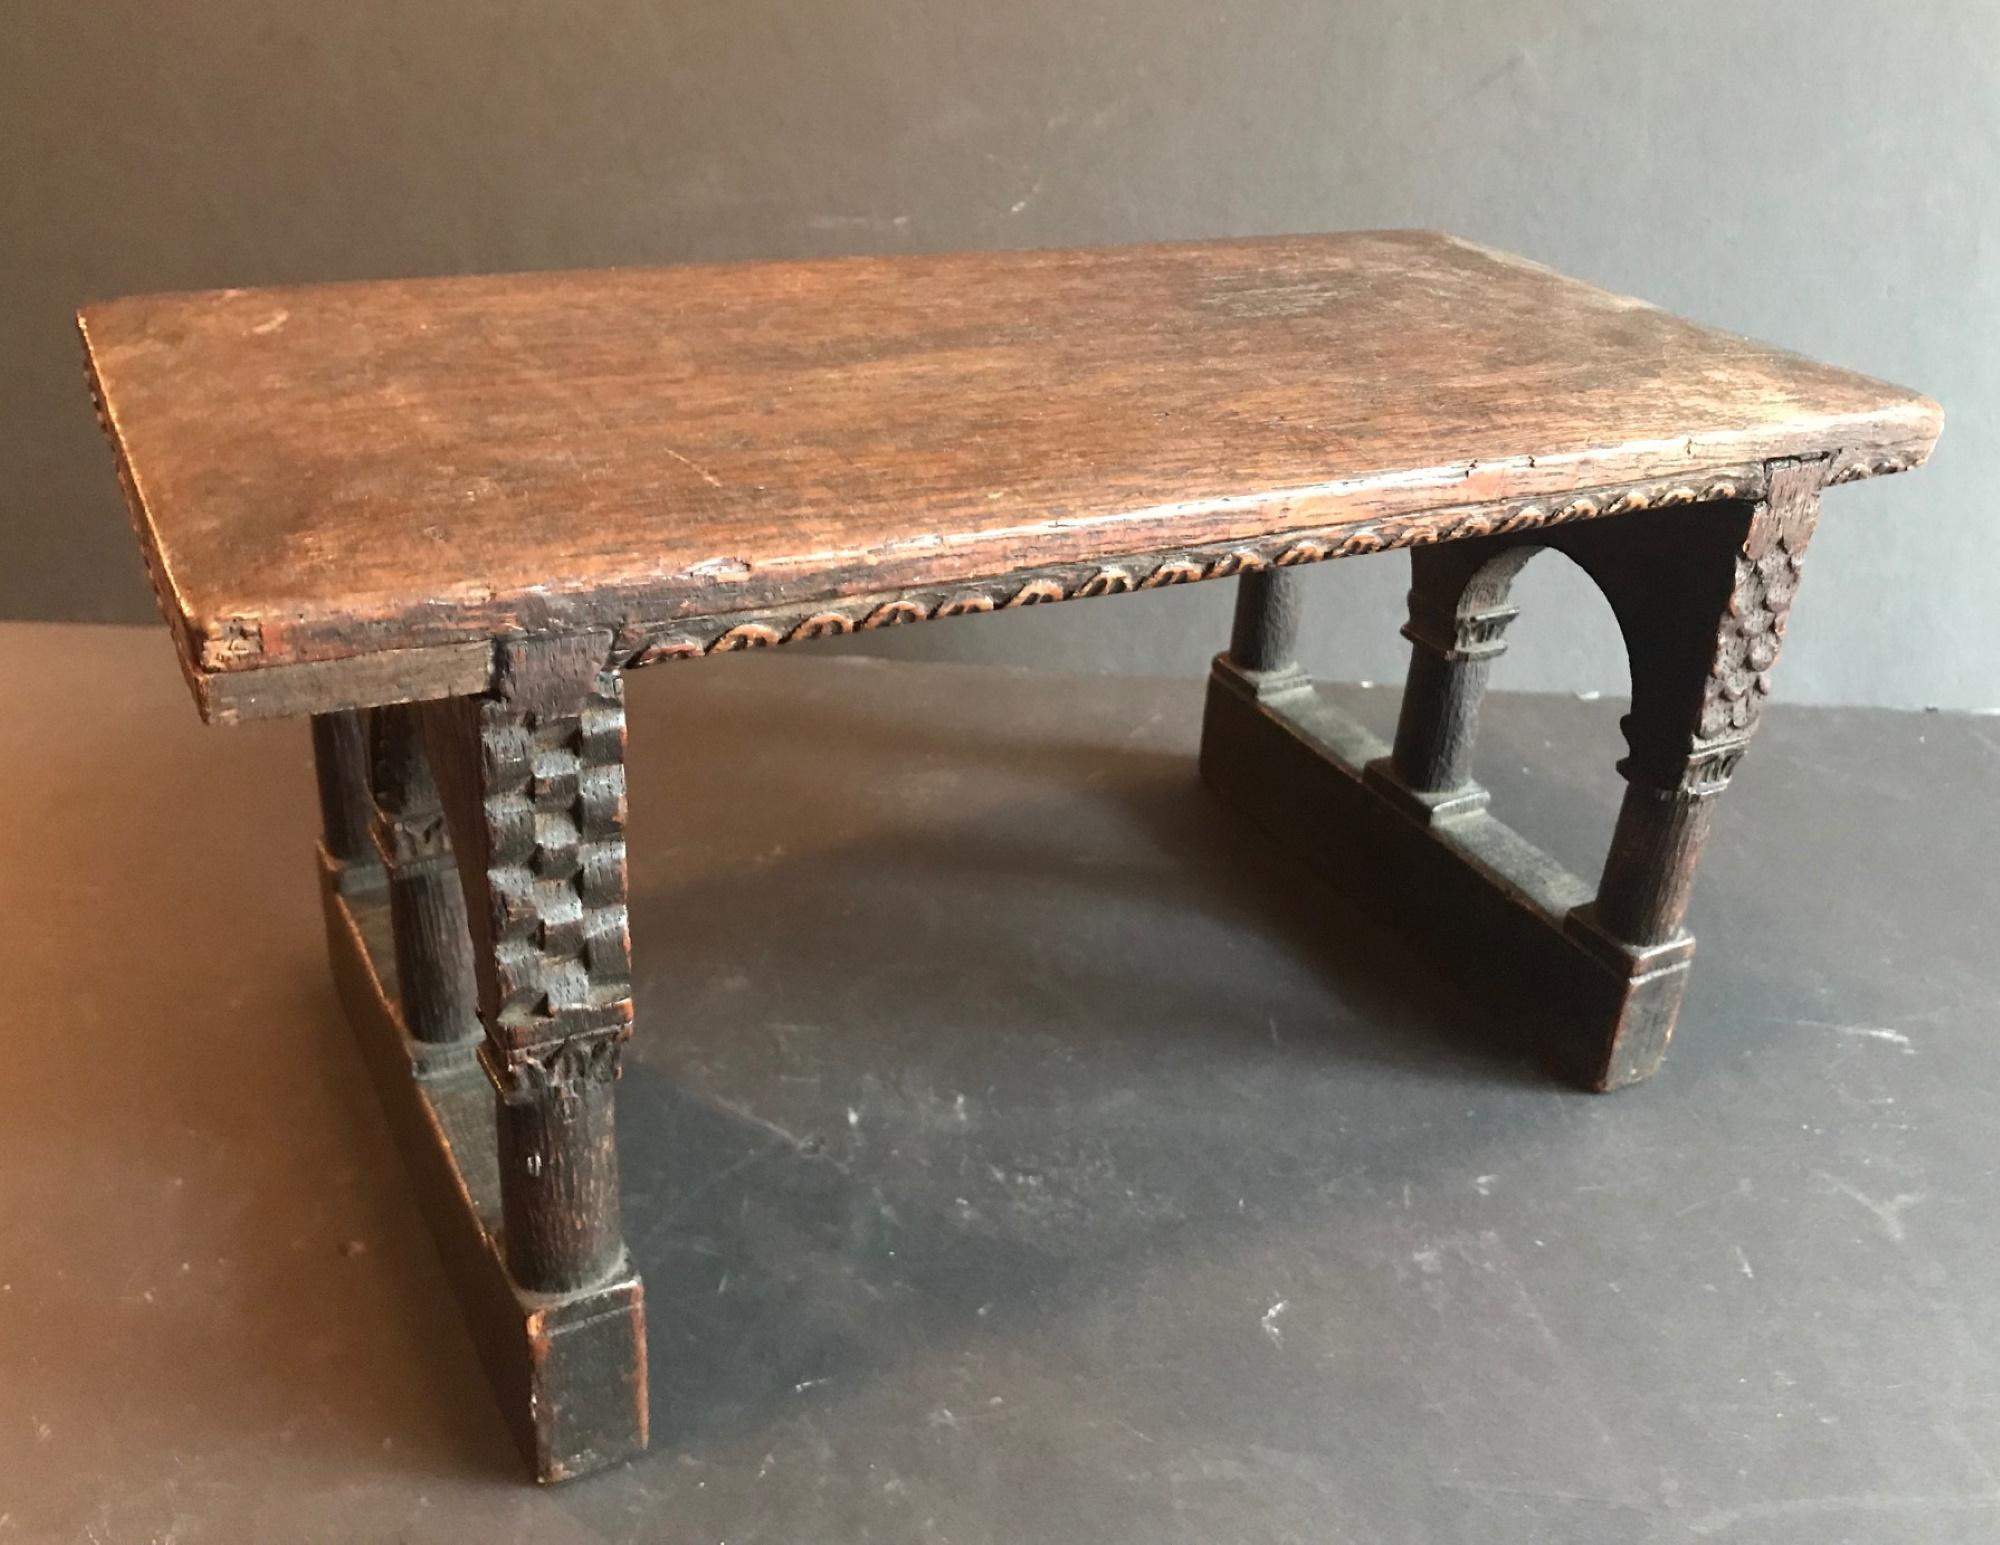 This is a very unusual small footstool or bench. Beautiful chip-carved decoration make this little furniture special. Made out of English Oak, patina and proportion on this miniature are perfect.
Very good condition. Wear due to age and